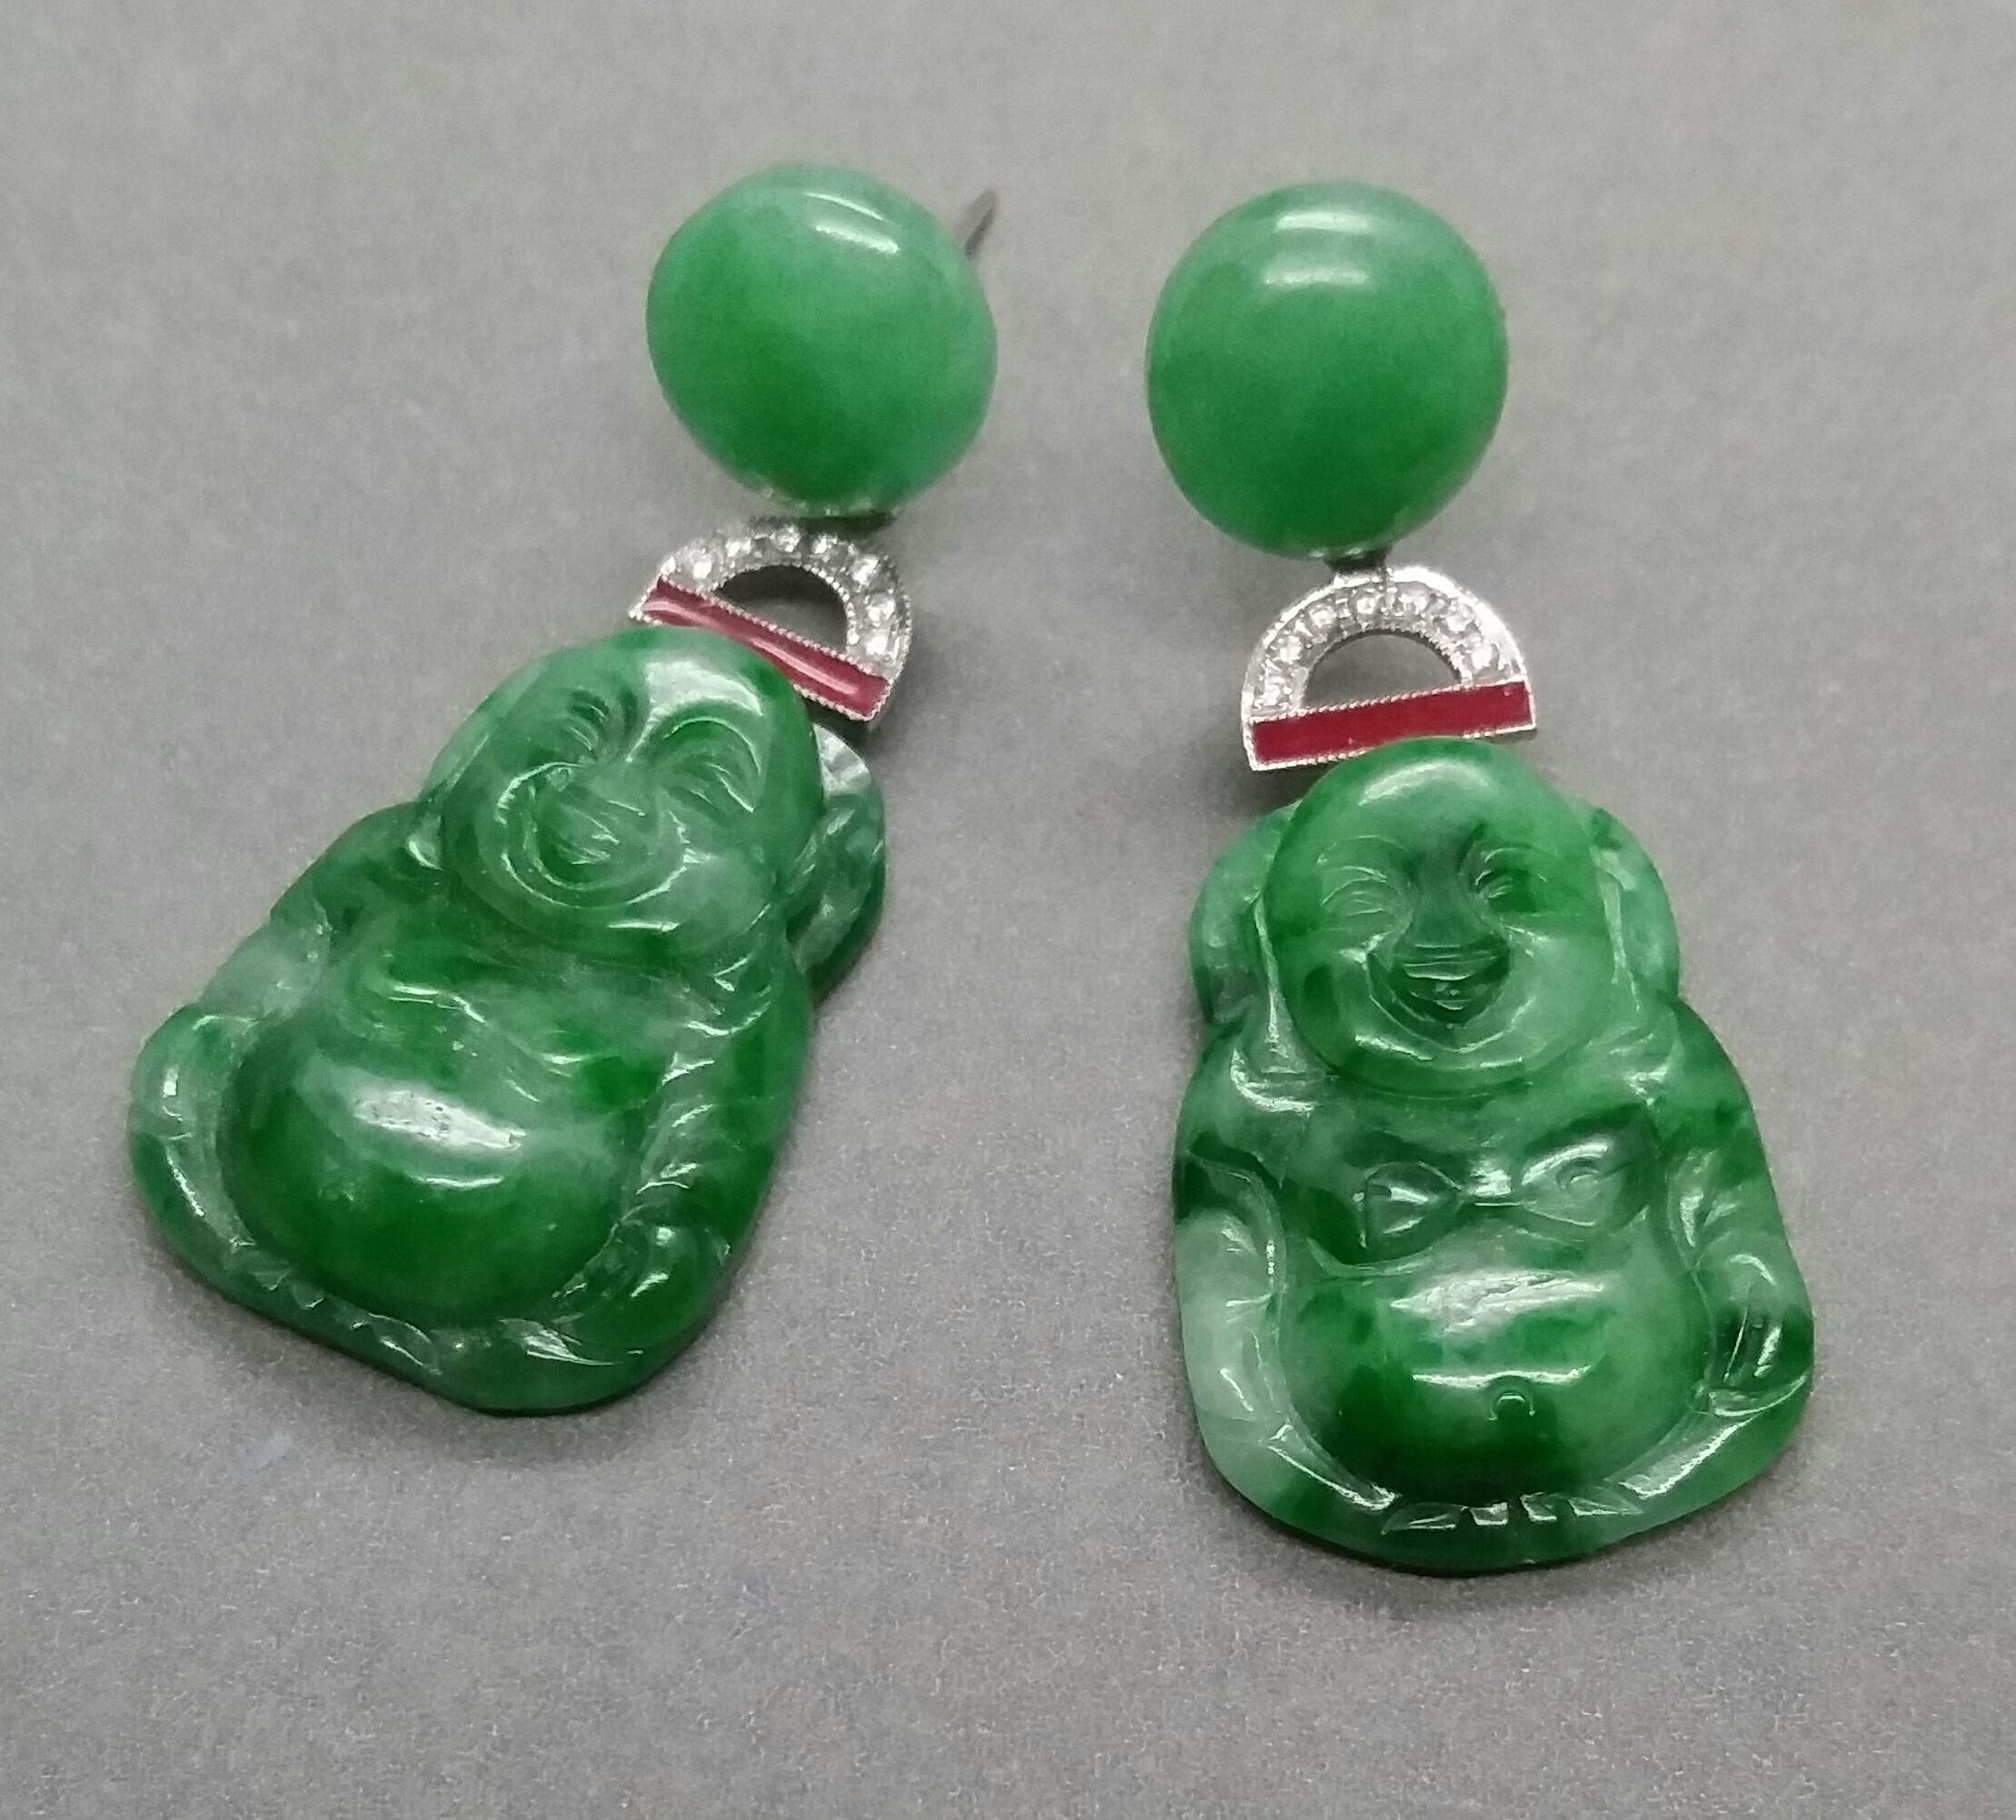 Art Deco Style earrings with 2 round Burma Jade buttons tops ,central parts in white gold,14 round full cut diamonds,red enamel and bottom parts composed of 2 Burma Jade Buddhas

In 1978 our workshop started in Italy to make simple-chic Art Deco